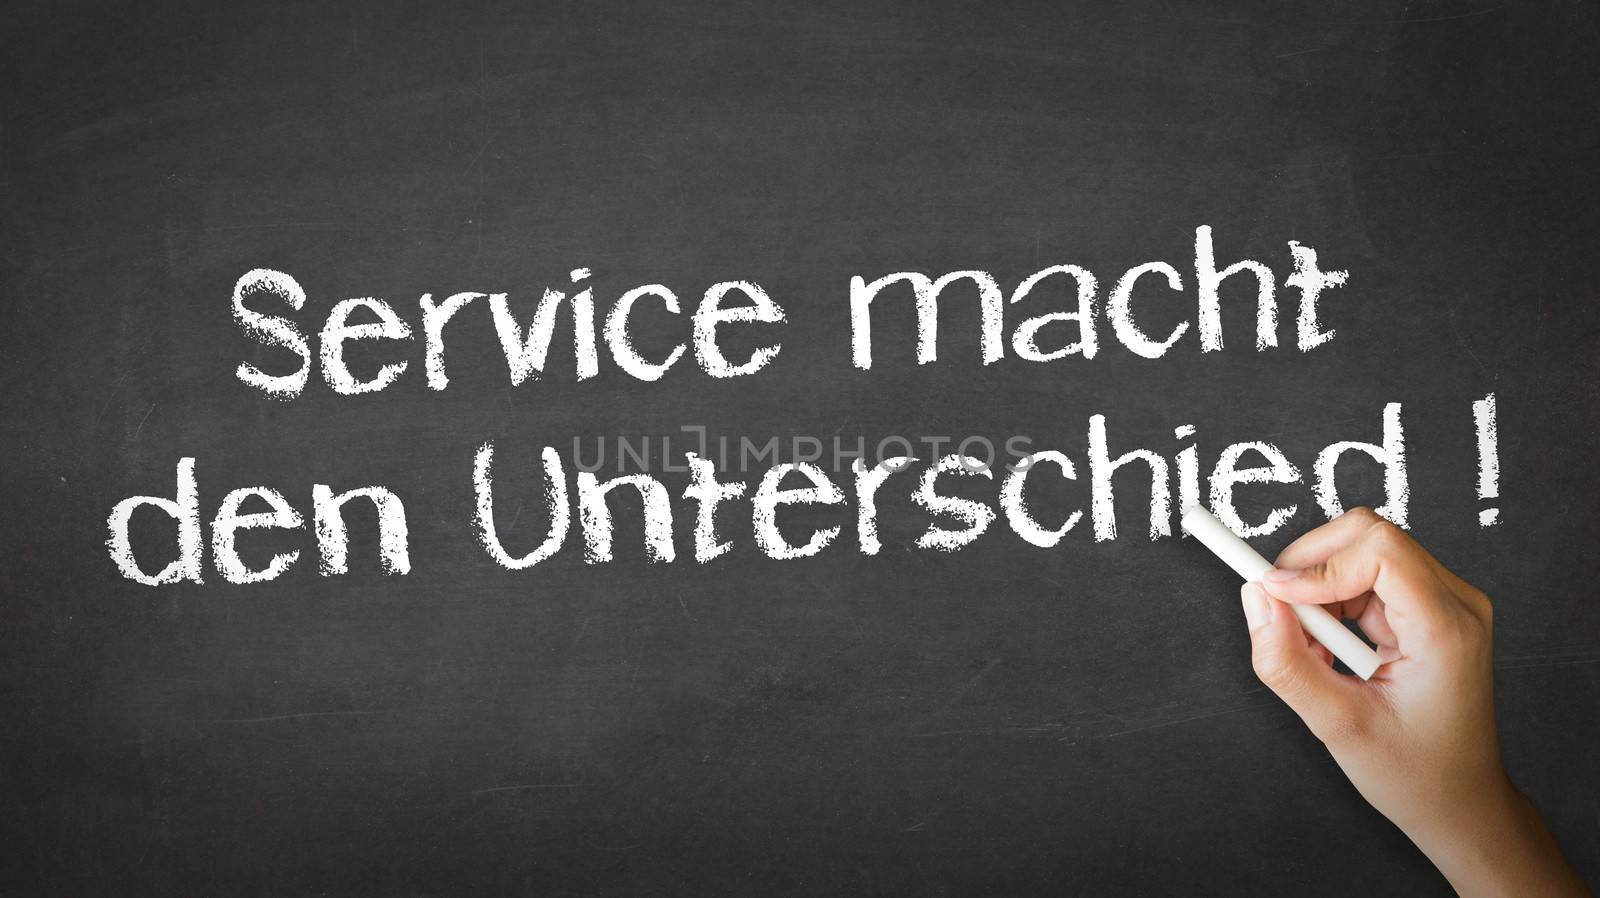 Service makes the difference Chalk Illustration by kbuntu